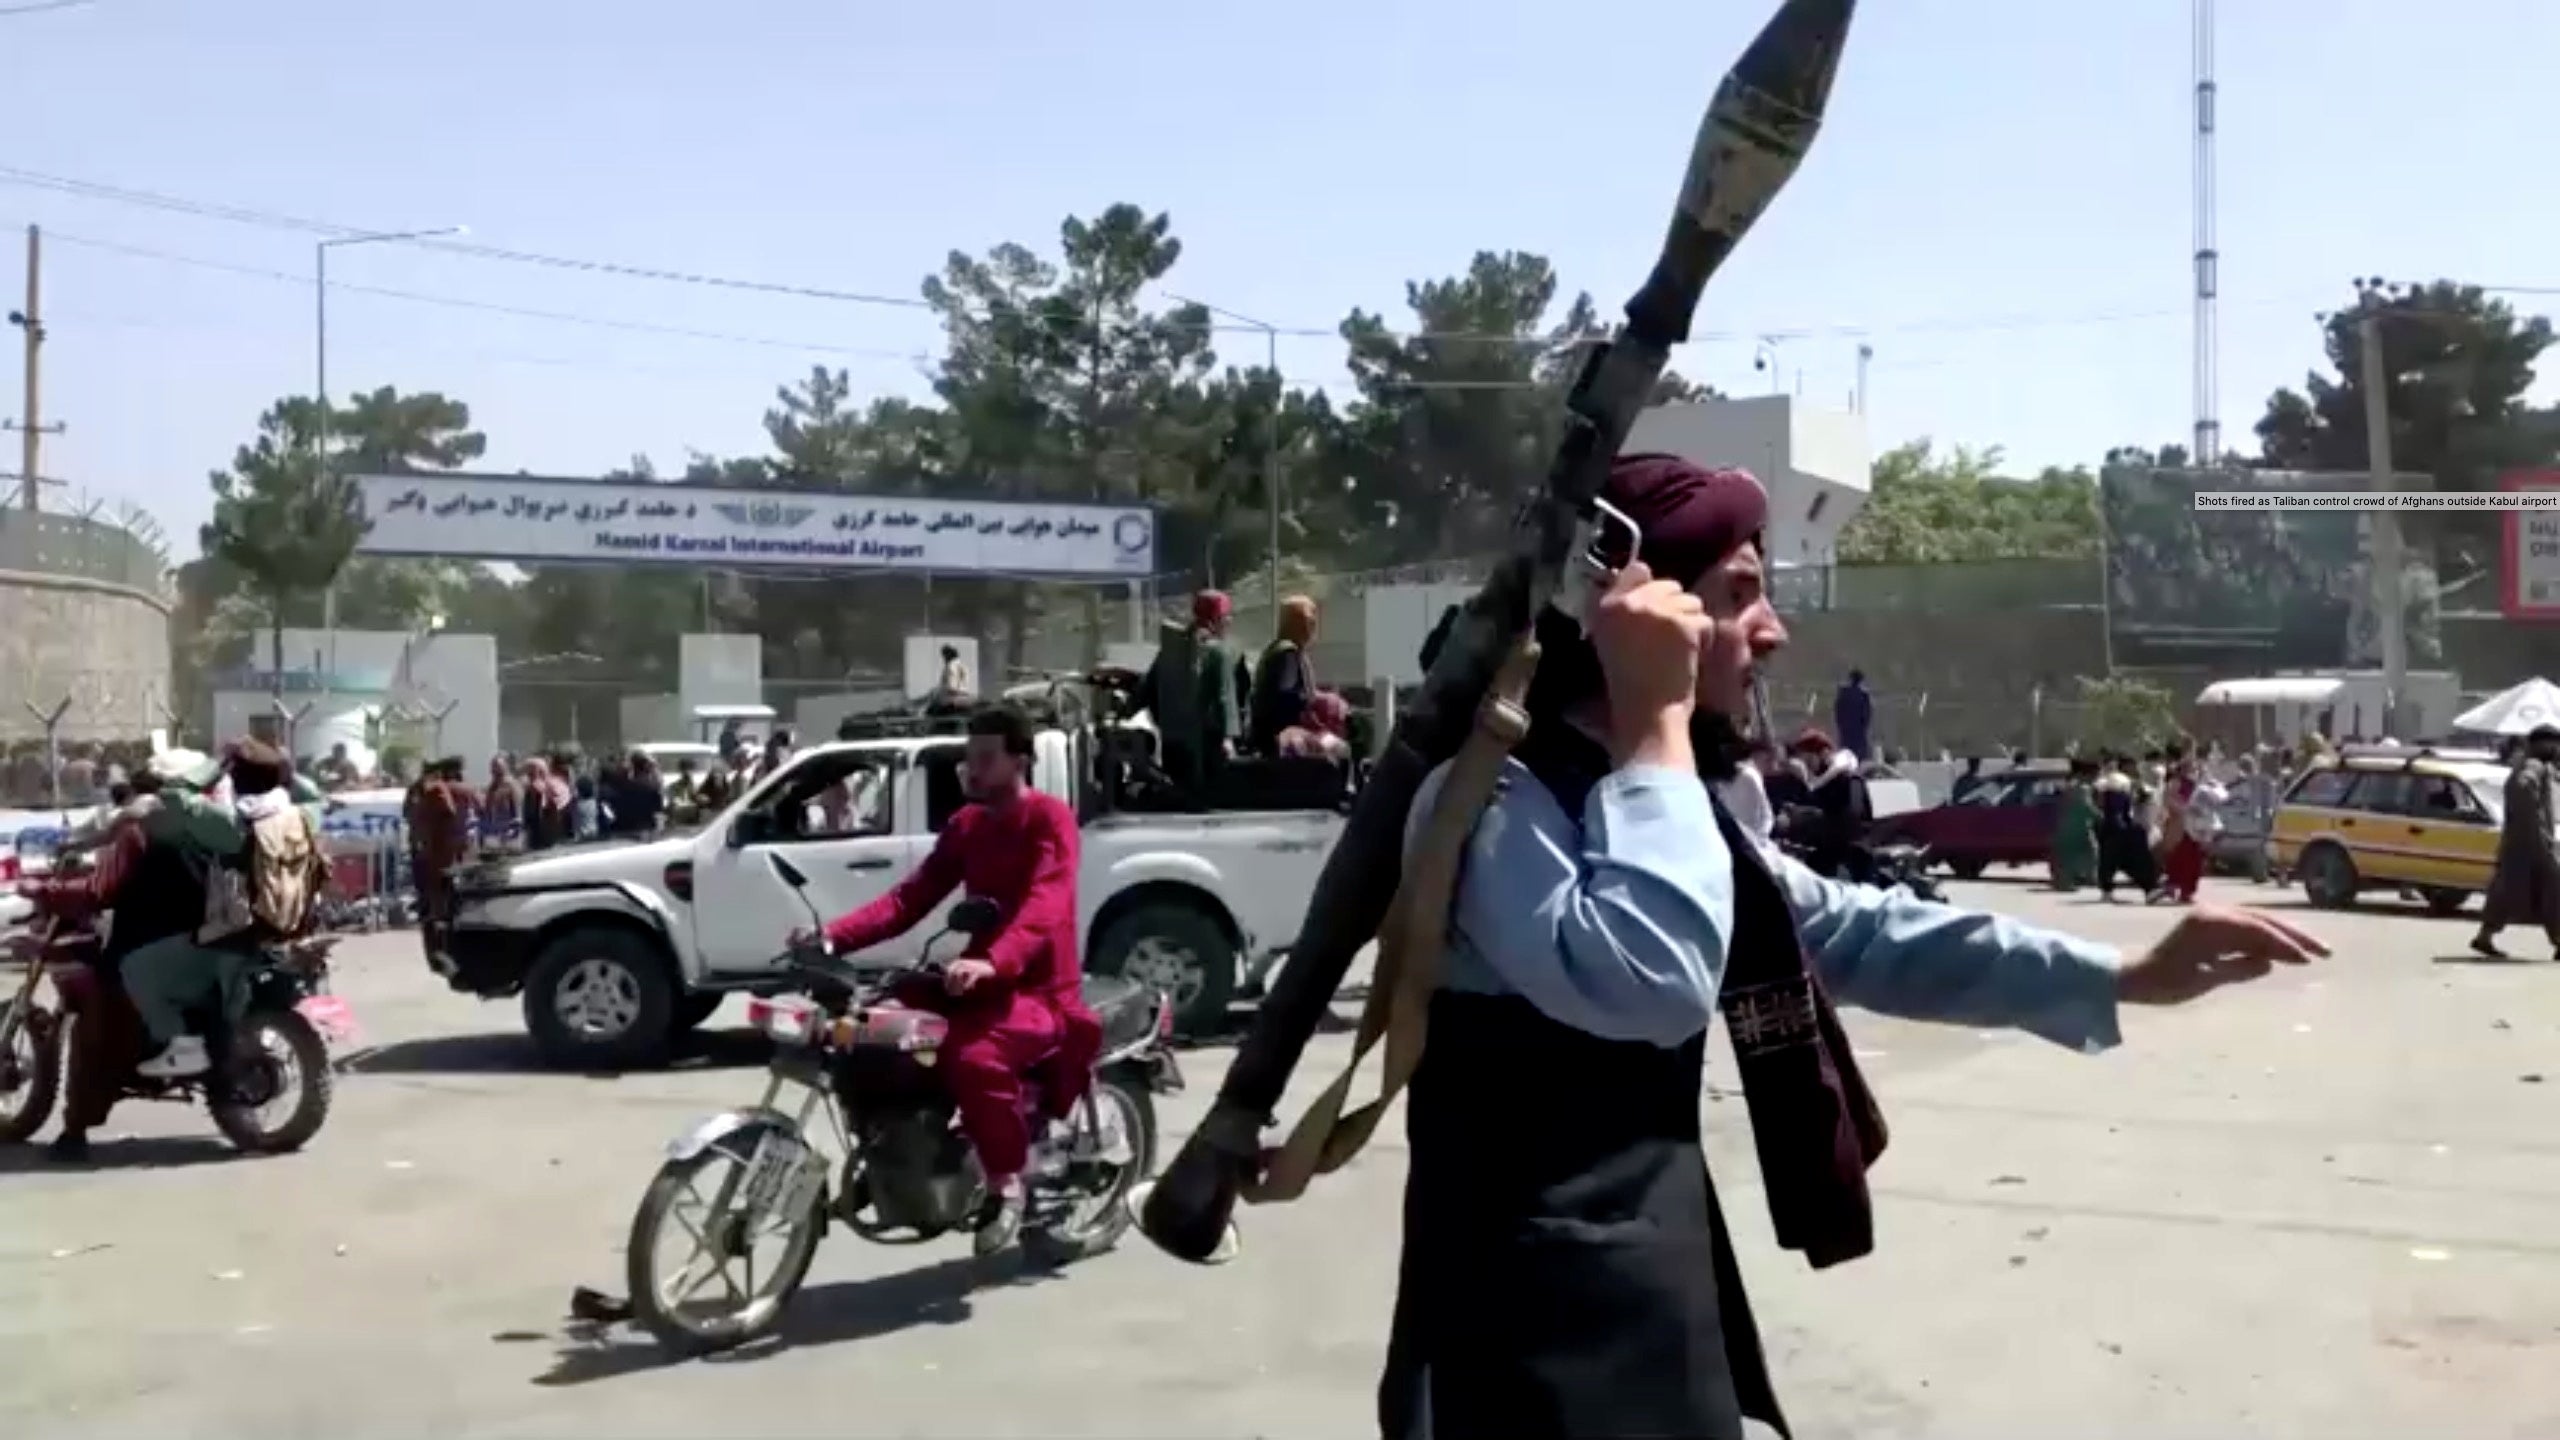 A Taliban fighter runs towards a crowd outside Kabul airport, Afghanistan